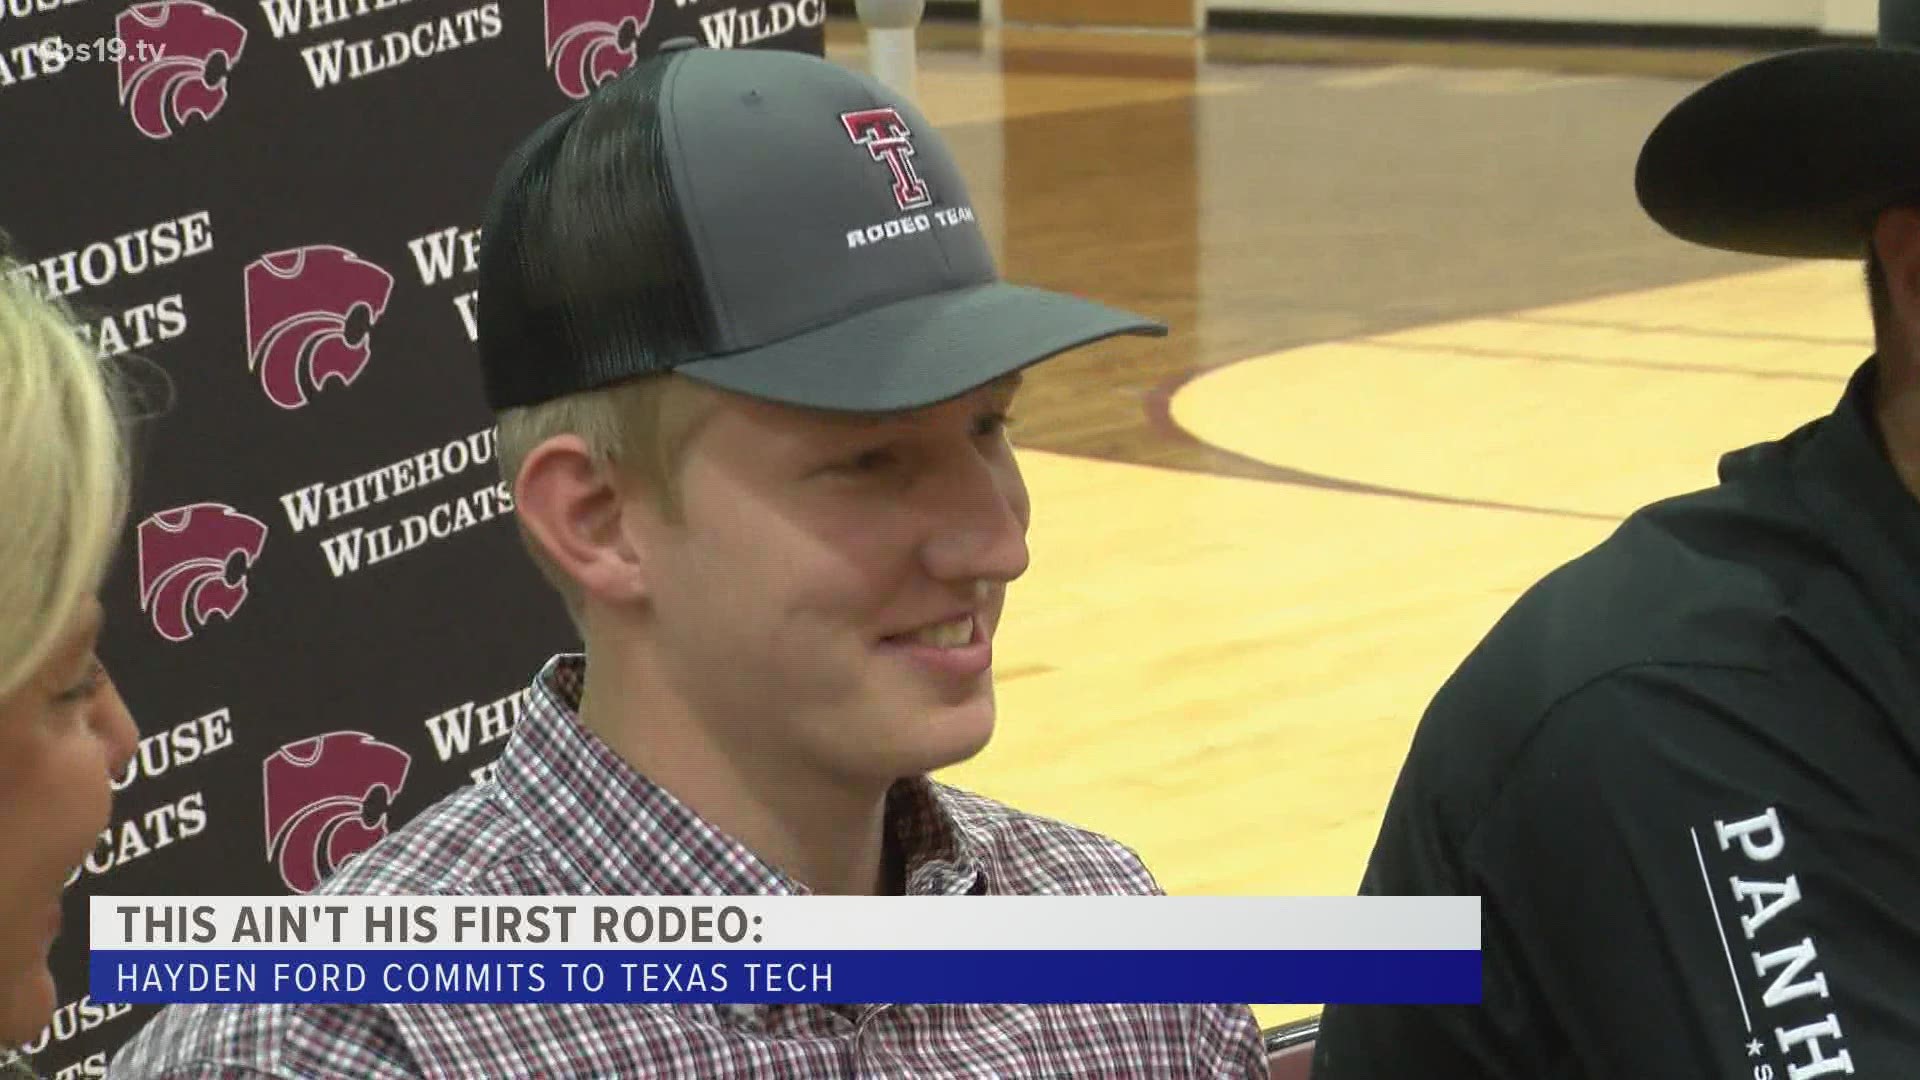 Hayden Ford is off to Lubbock next fall to attend Texas Tech University and compete on their rodeo team.